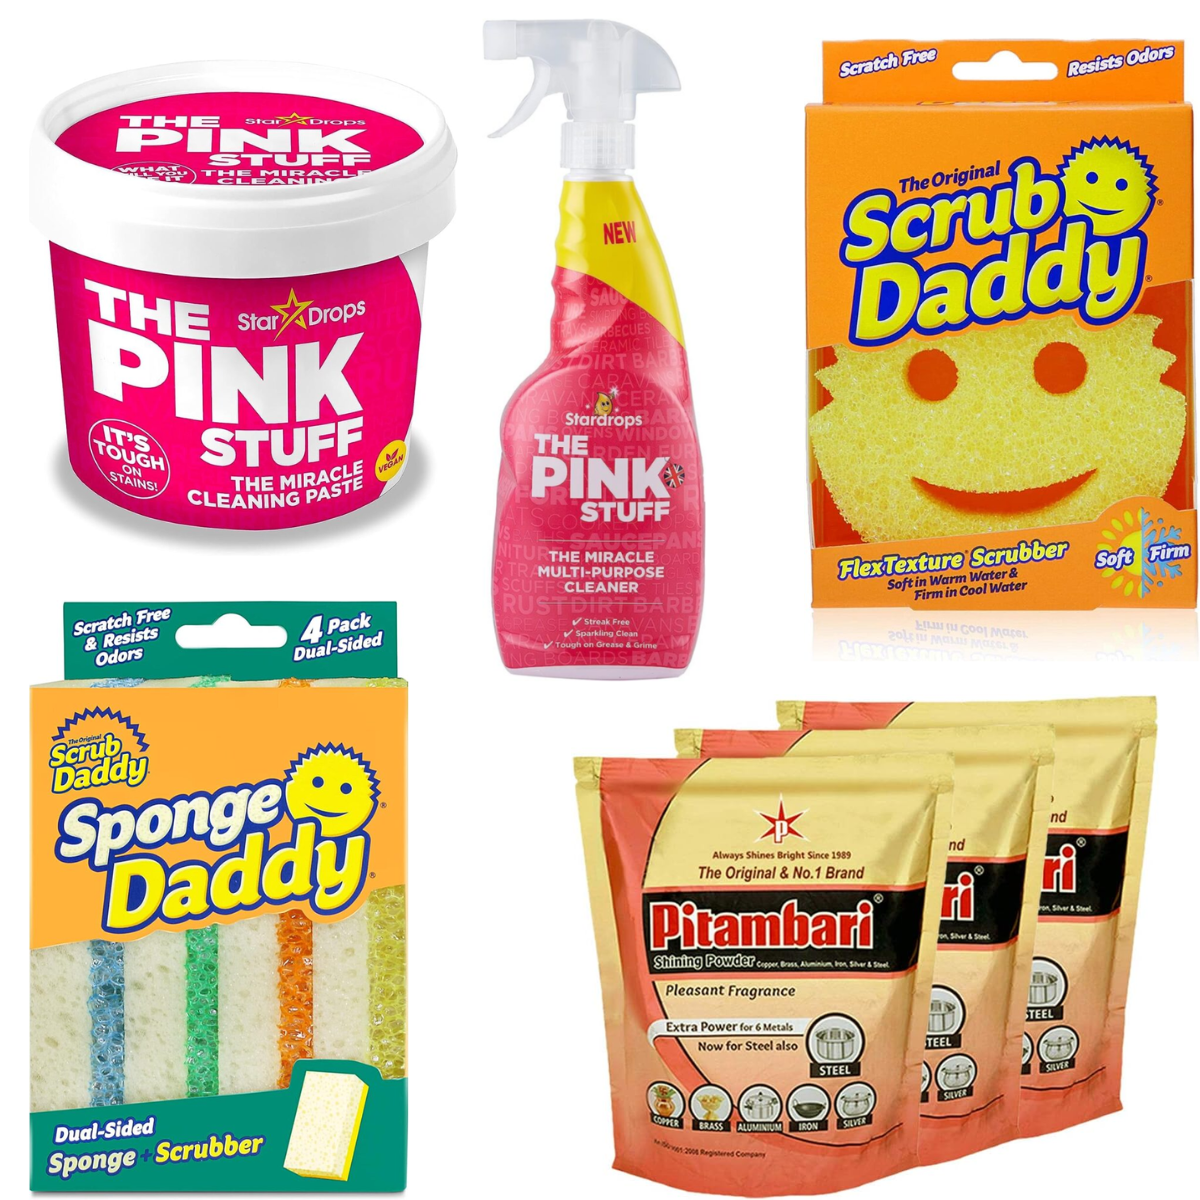 Pink Stuff Paste for $4+, Scrub Daddy Sponges for $3+